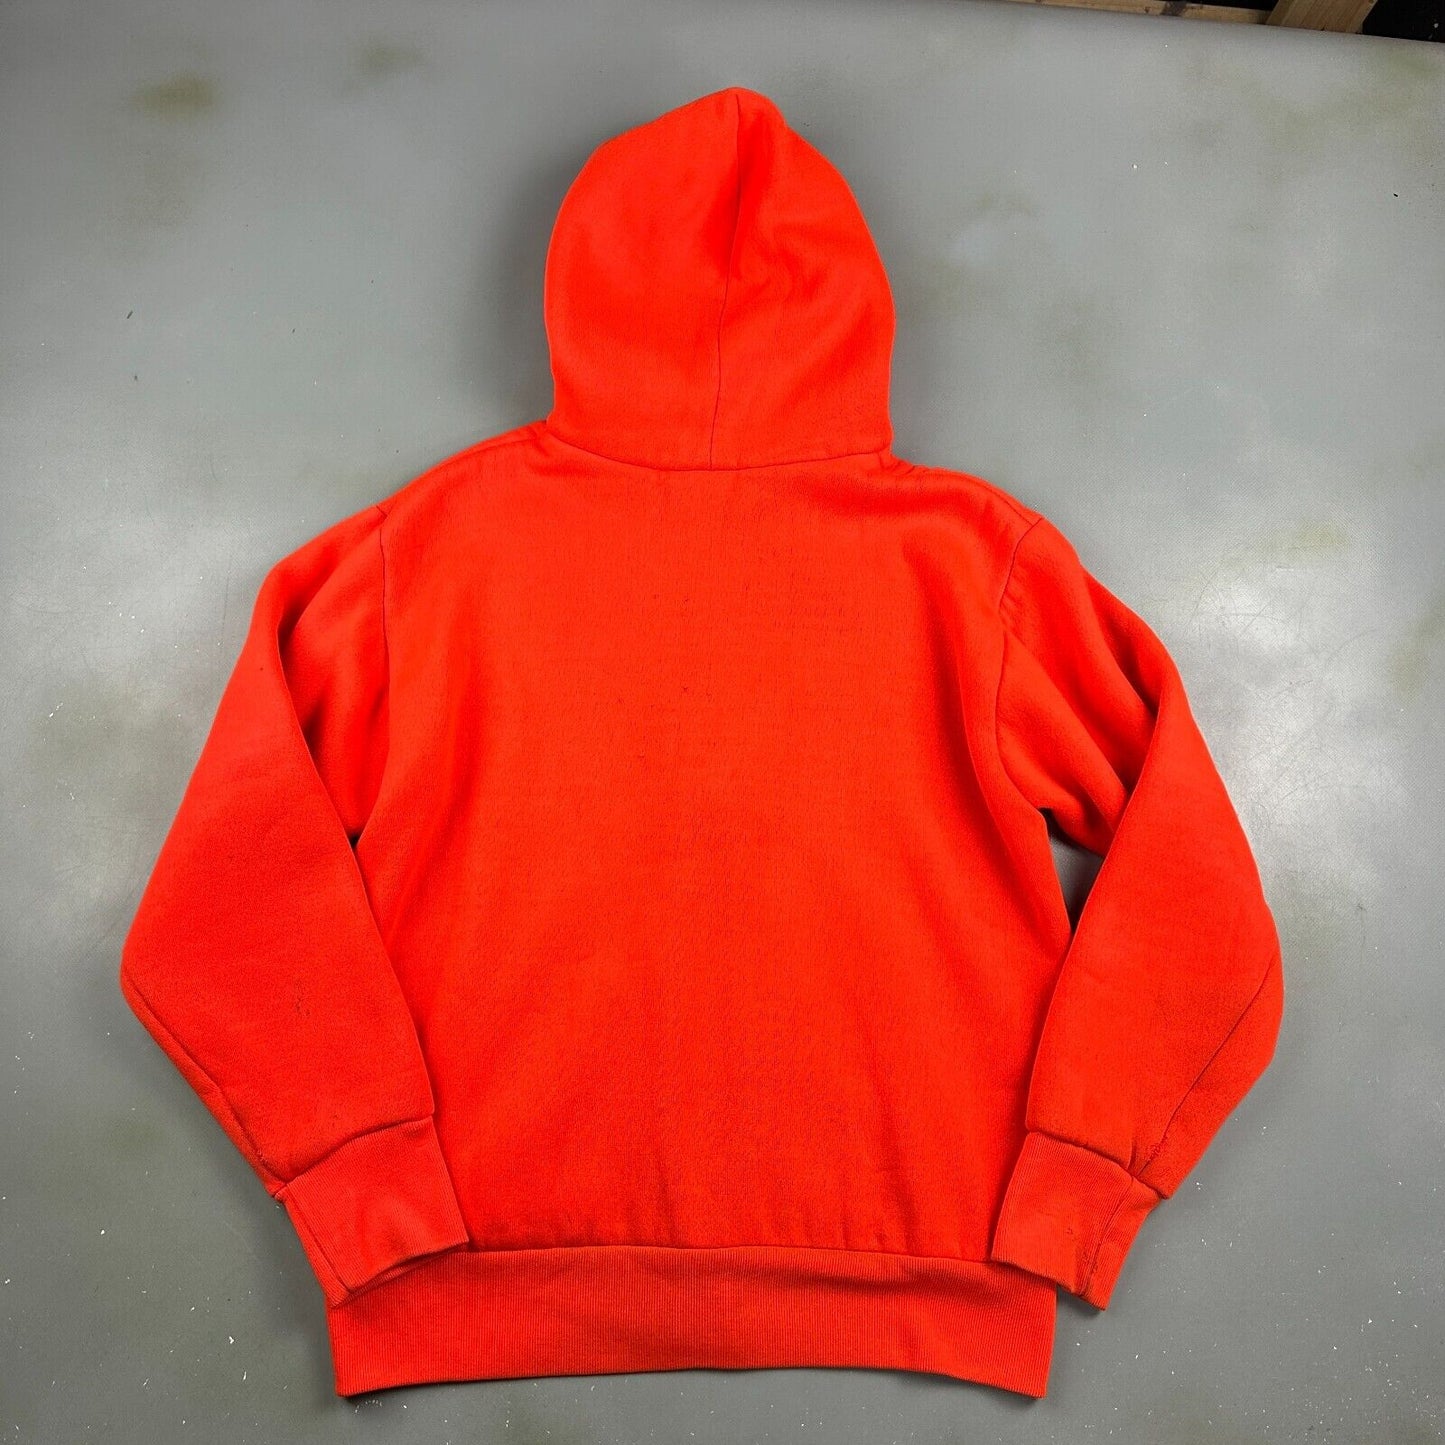 VINTAGE 90s | CAMBER Orange Thermal Lined Hoodie Sweater sz Small Adult